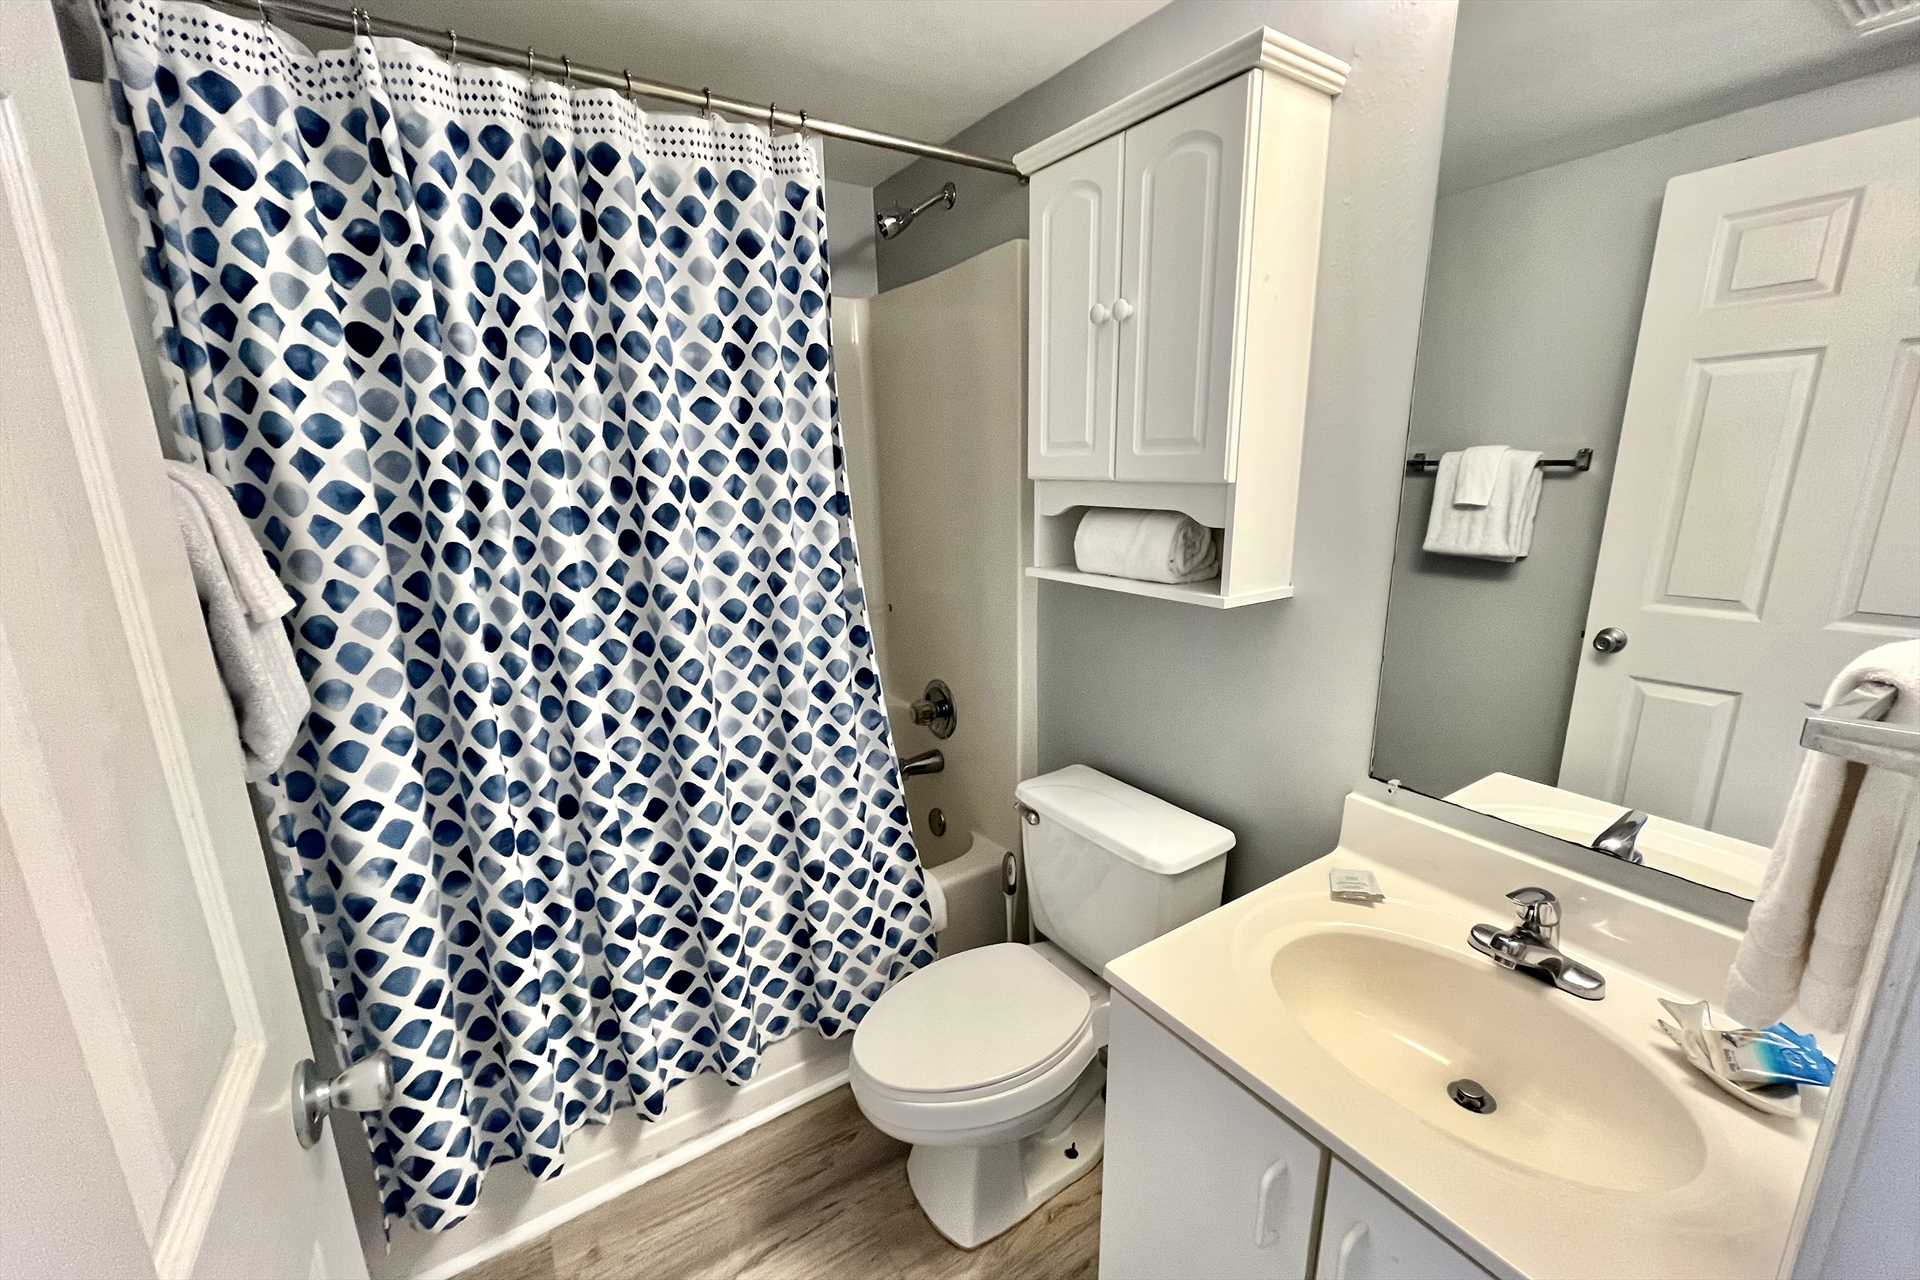 The hall bathroom includes a shower/tub combo plus a starter